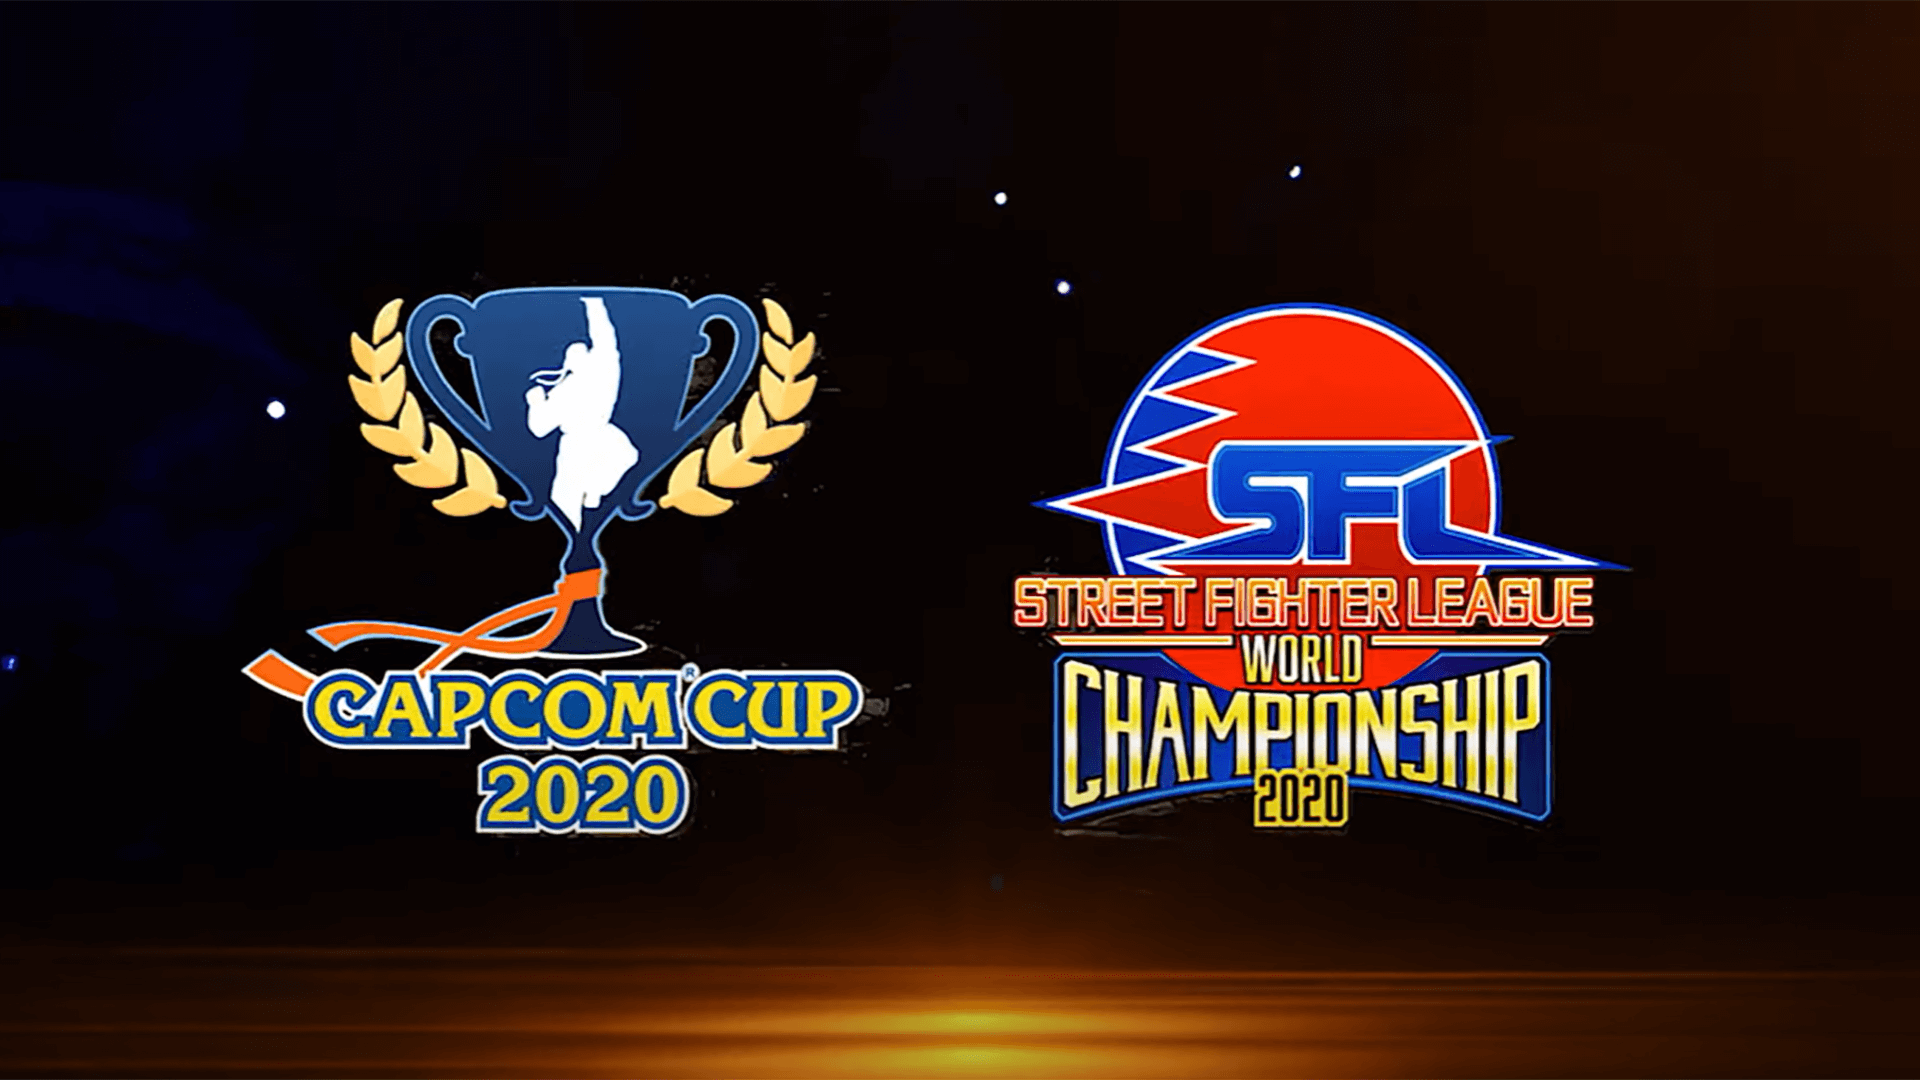 Capcom Cup 2020 announced and locked in to start February 19th